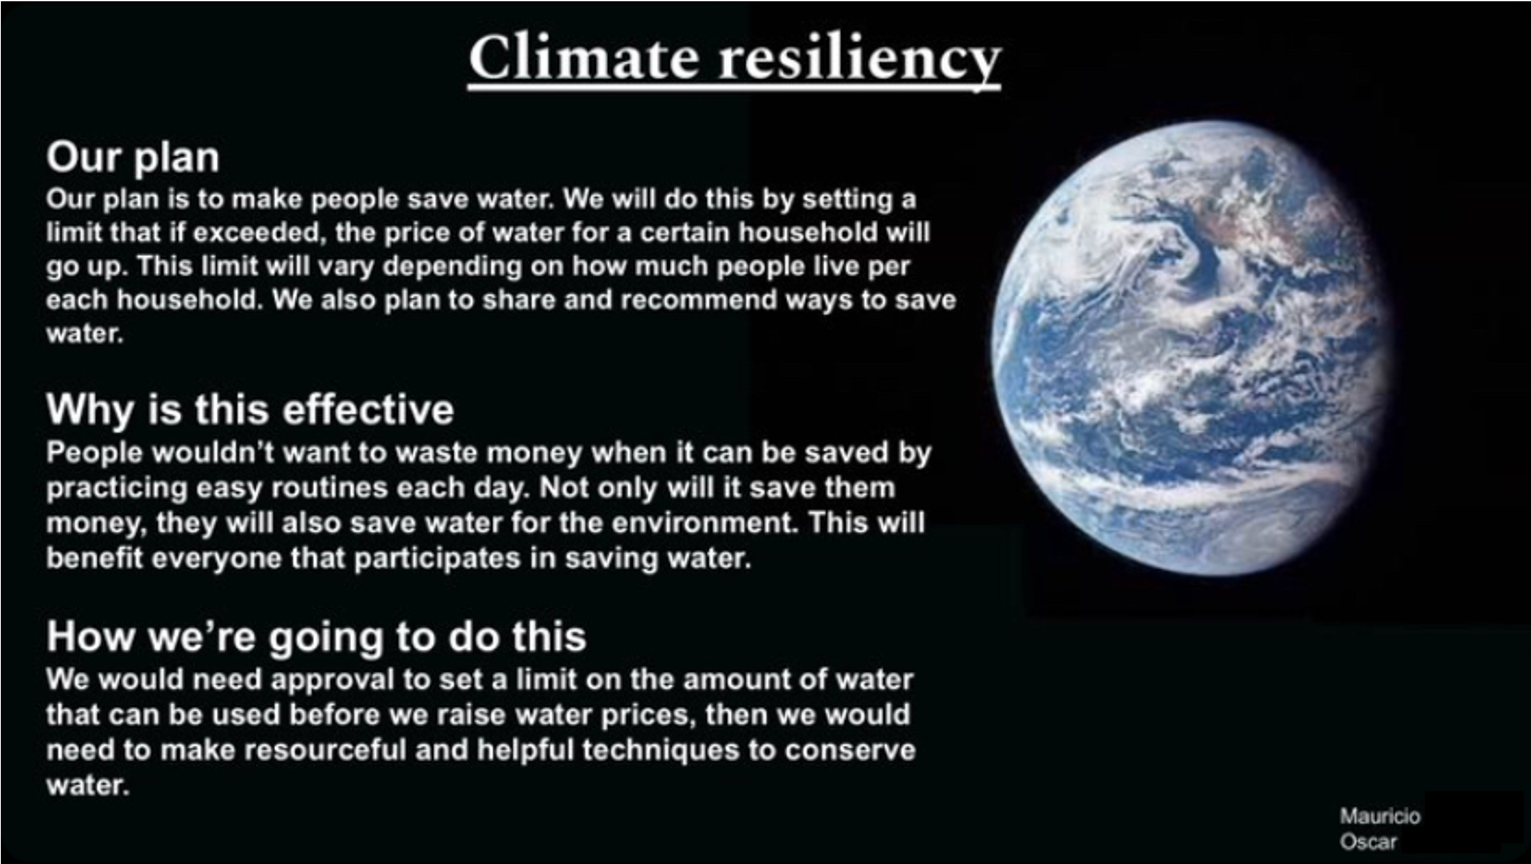 Climate Resiliency: Our plan, Why is this effective, and How we're going to do this